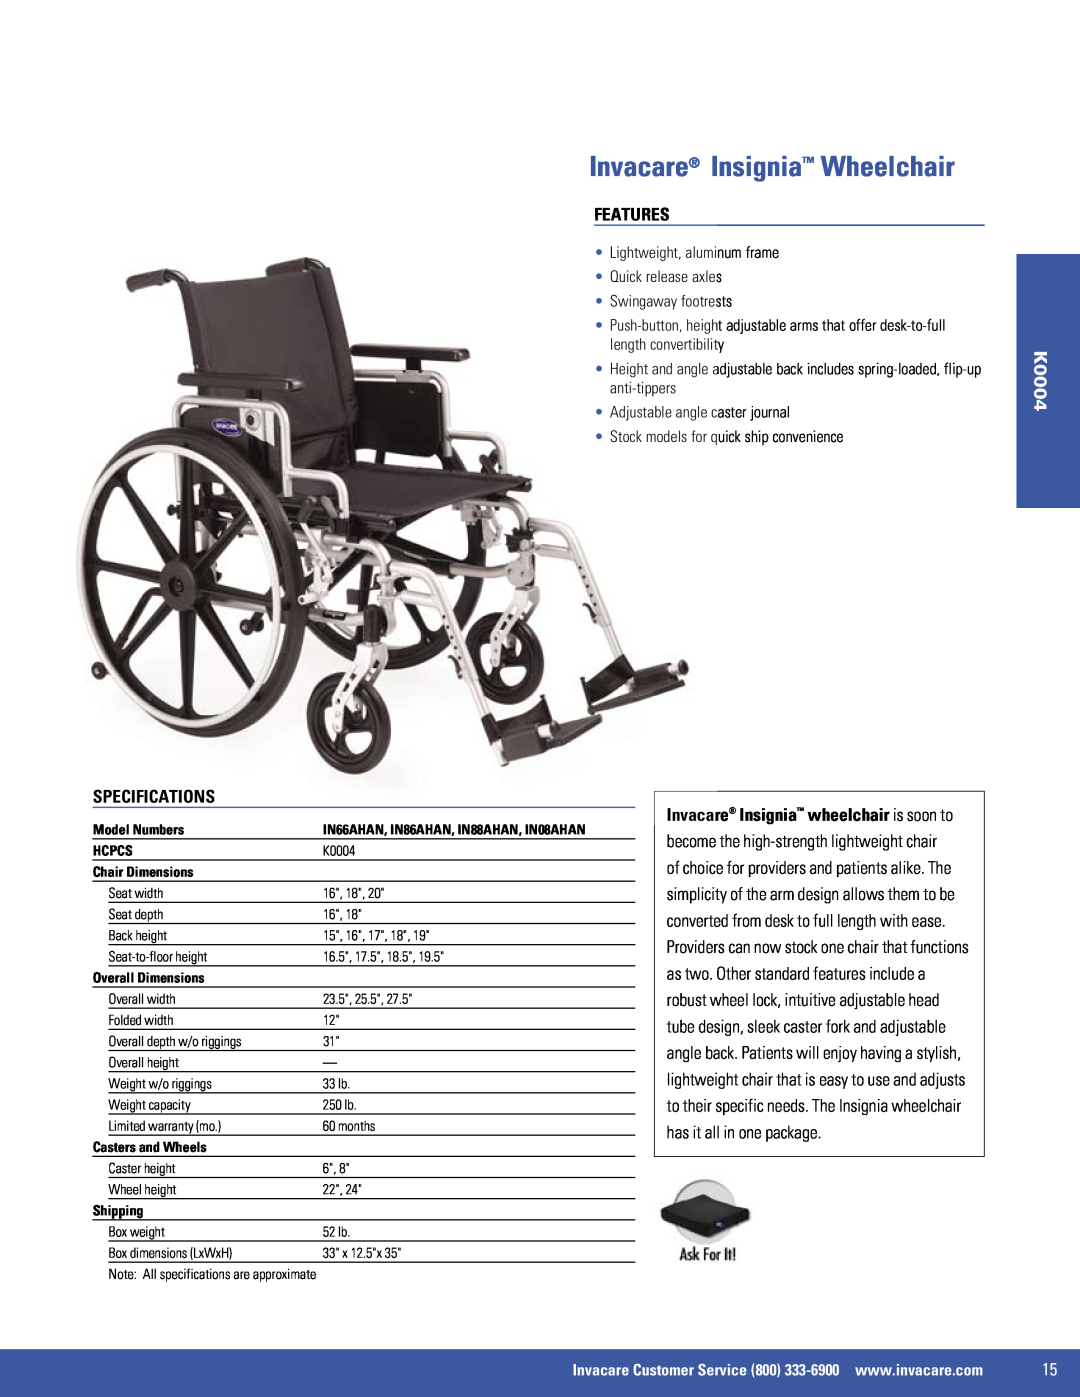 Invacare EX2, 9000 XT, SX5 Invacare Insignia Wheelchair, Features, K0004, Specifications, Adjustable angle caster journal 